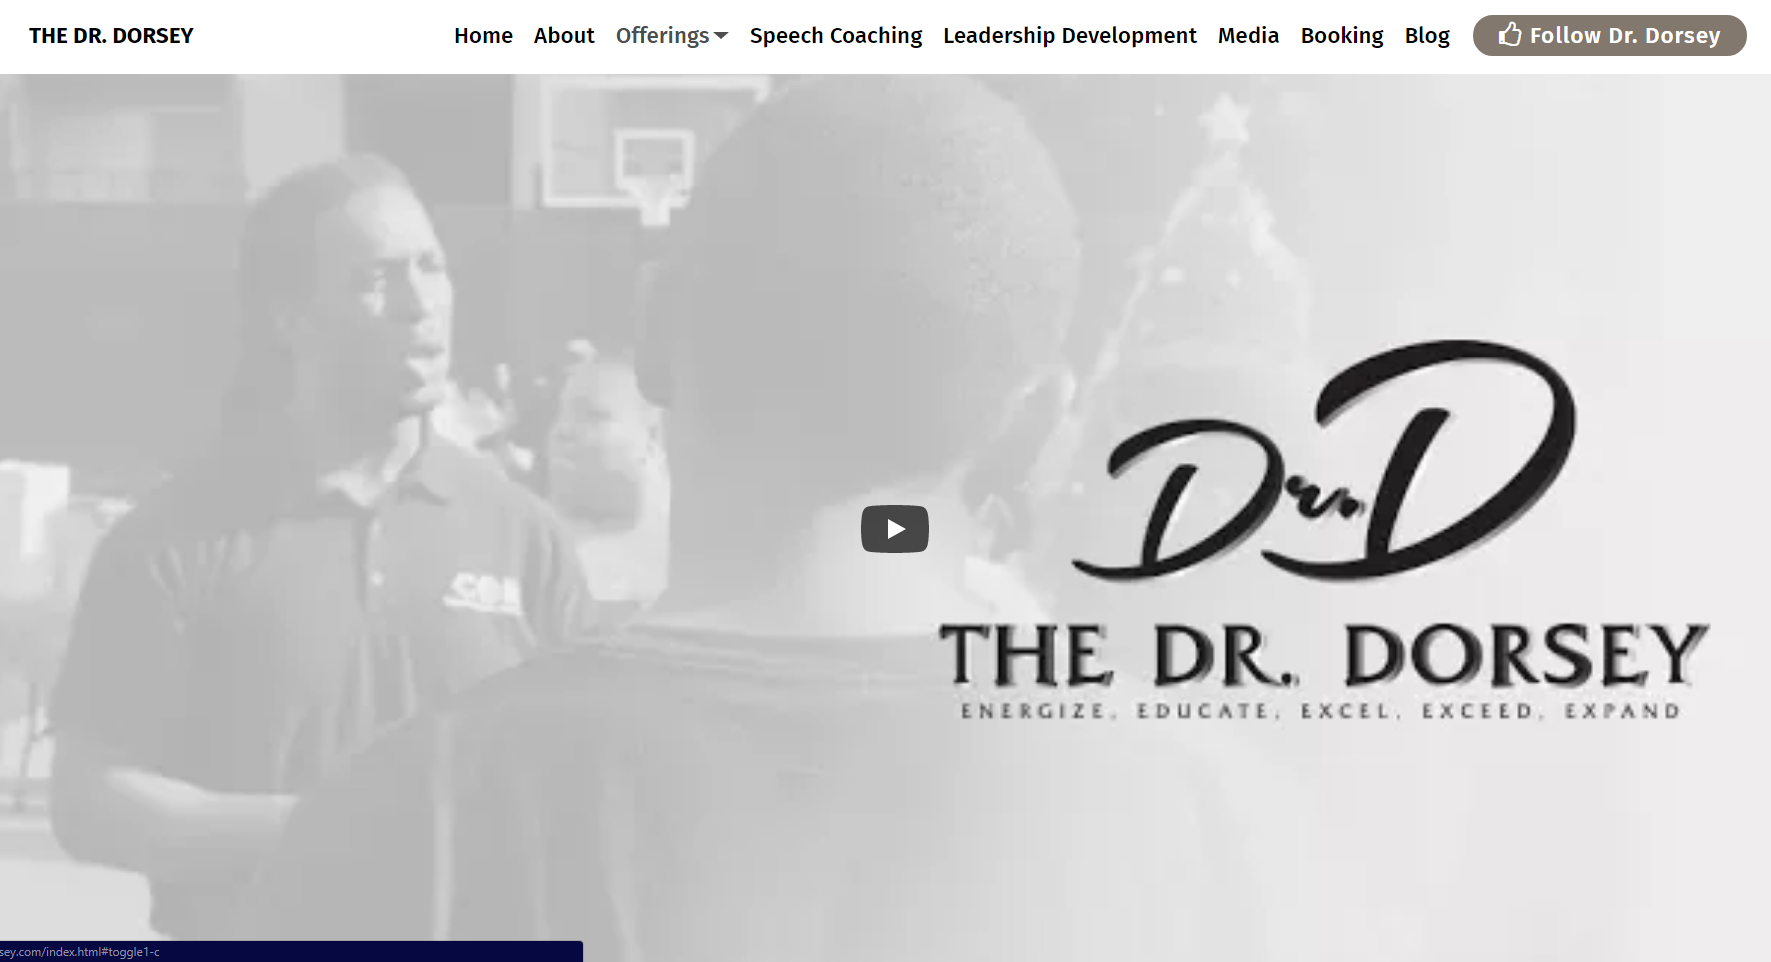 The Dr. Dorsey